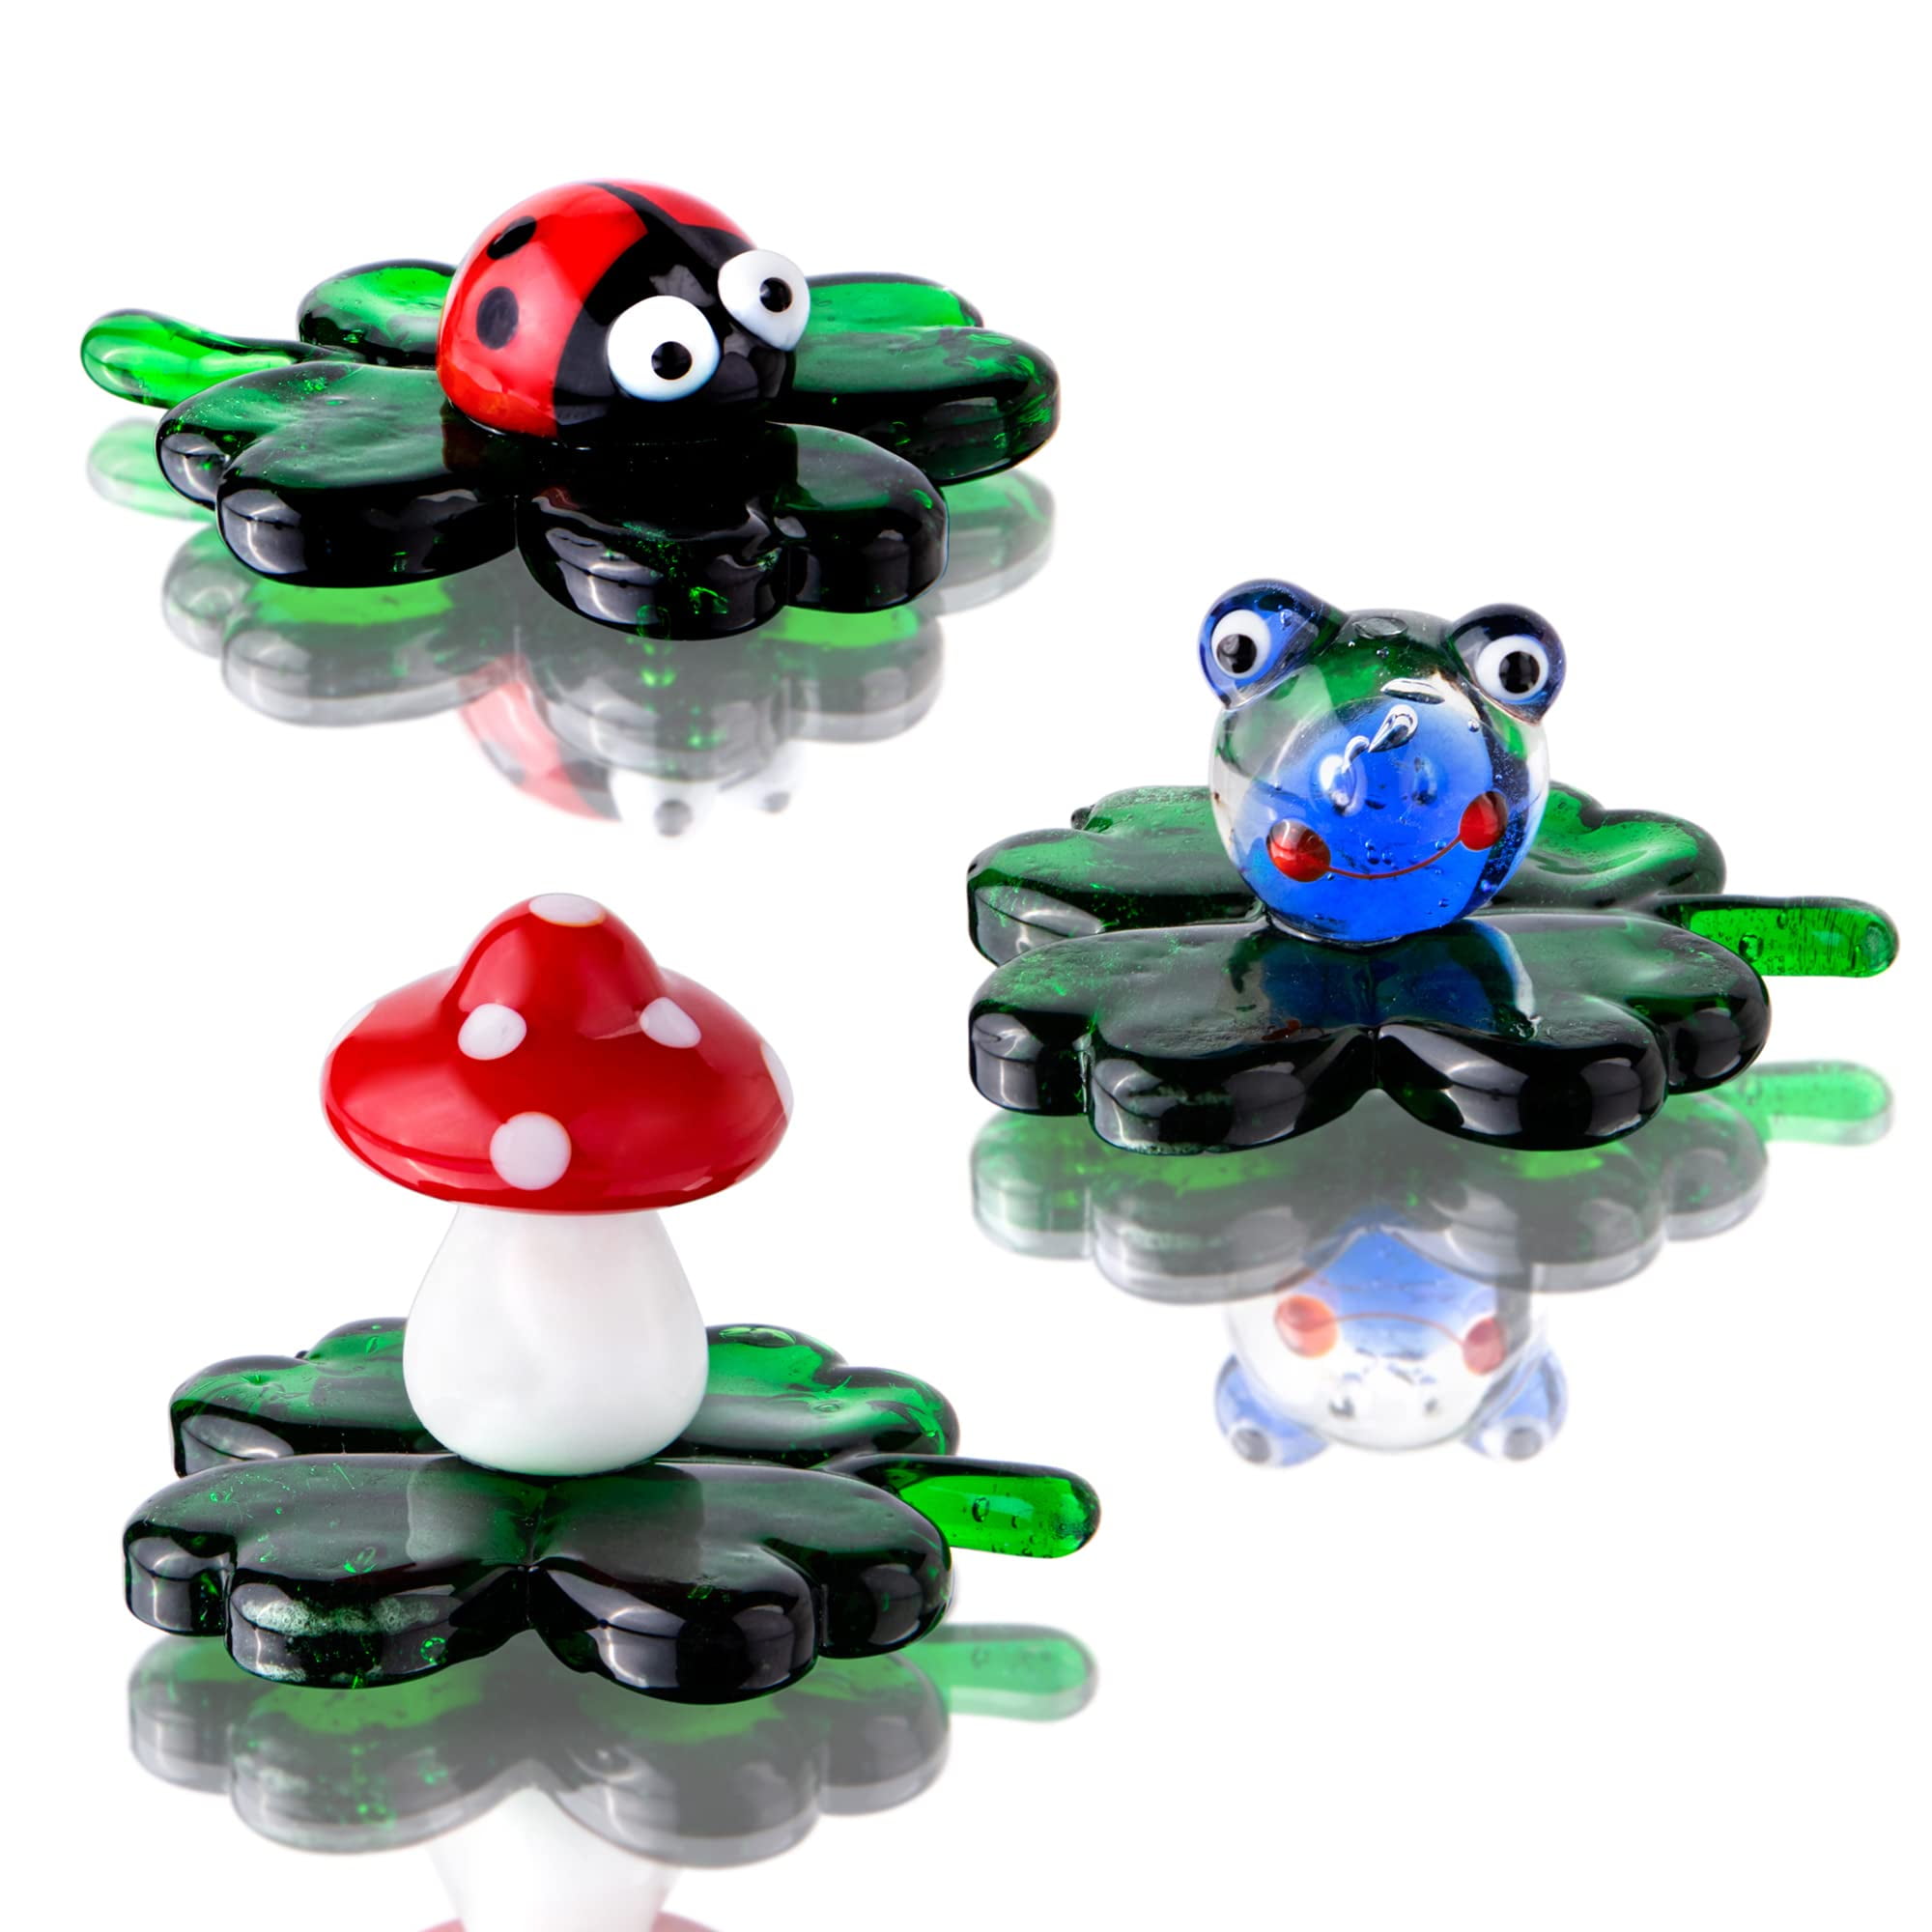 Hand Blown Four-Leaf Clover Figurine Art Glass Animals Collection with Cute  Ladybug/Frog/Mushroom Ornament, Pack of 3 